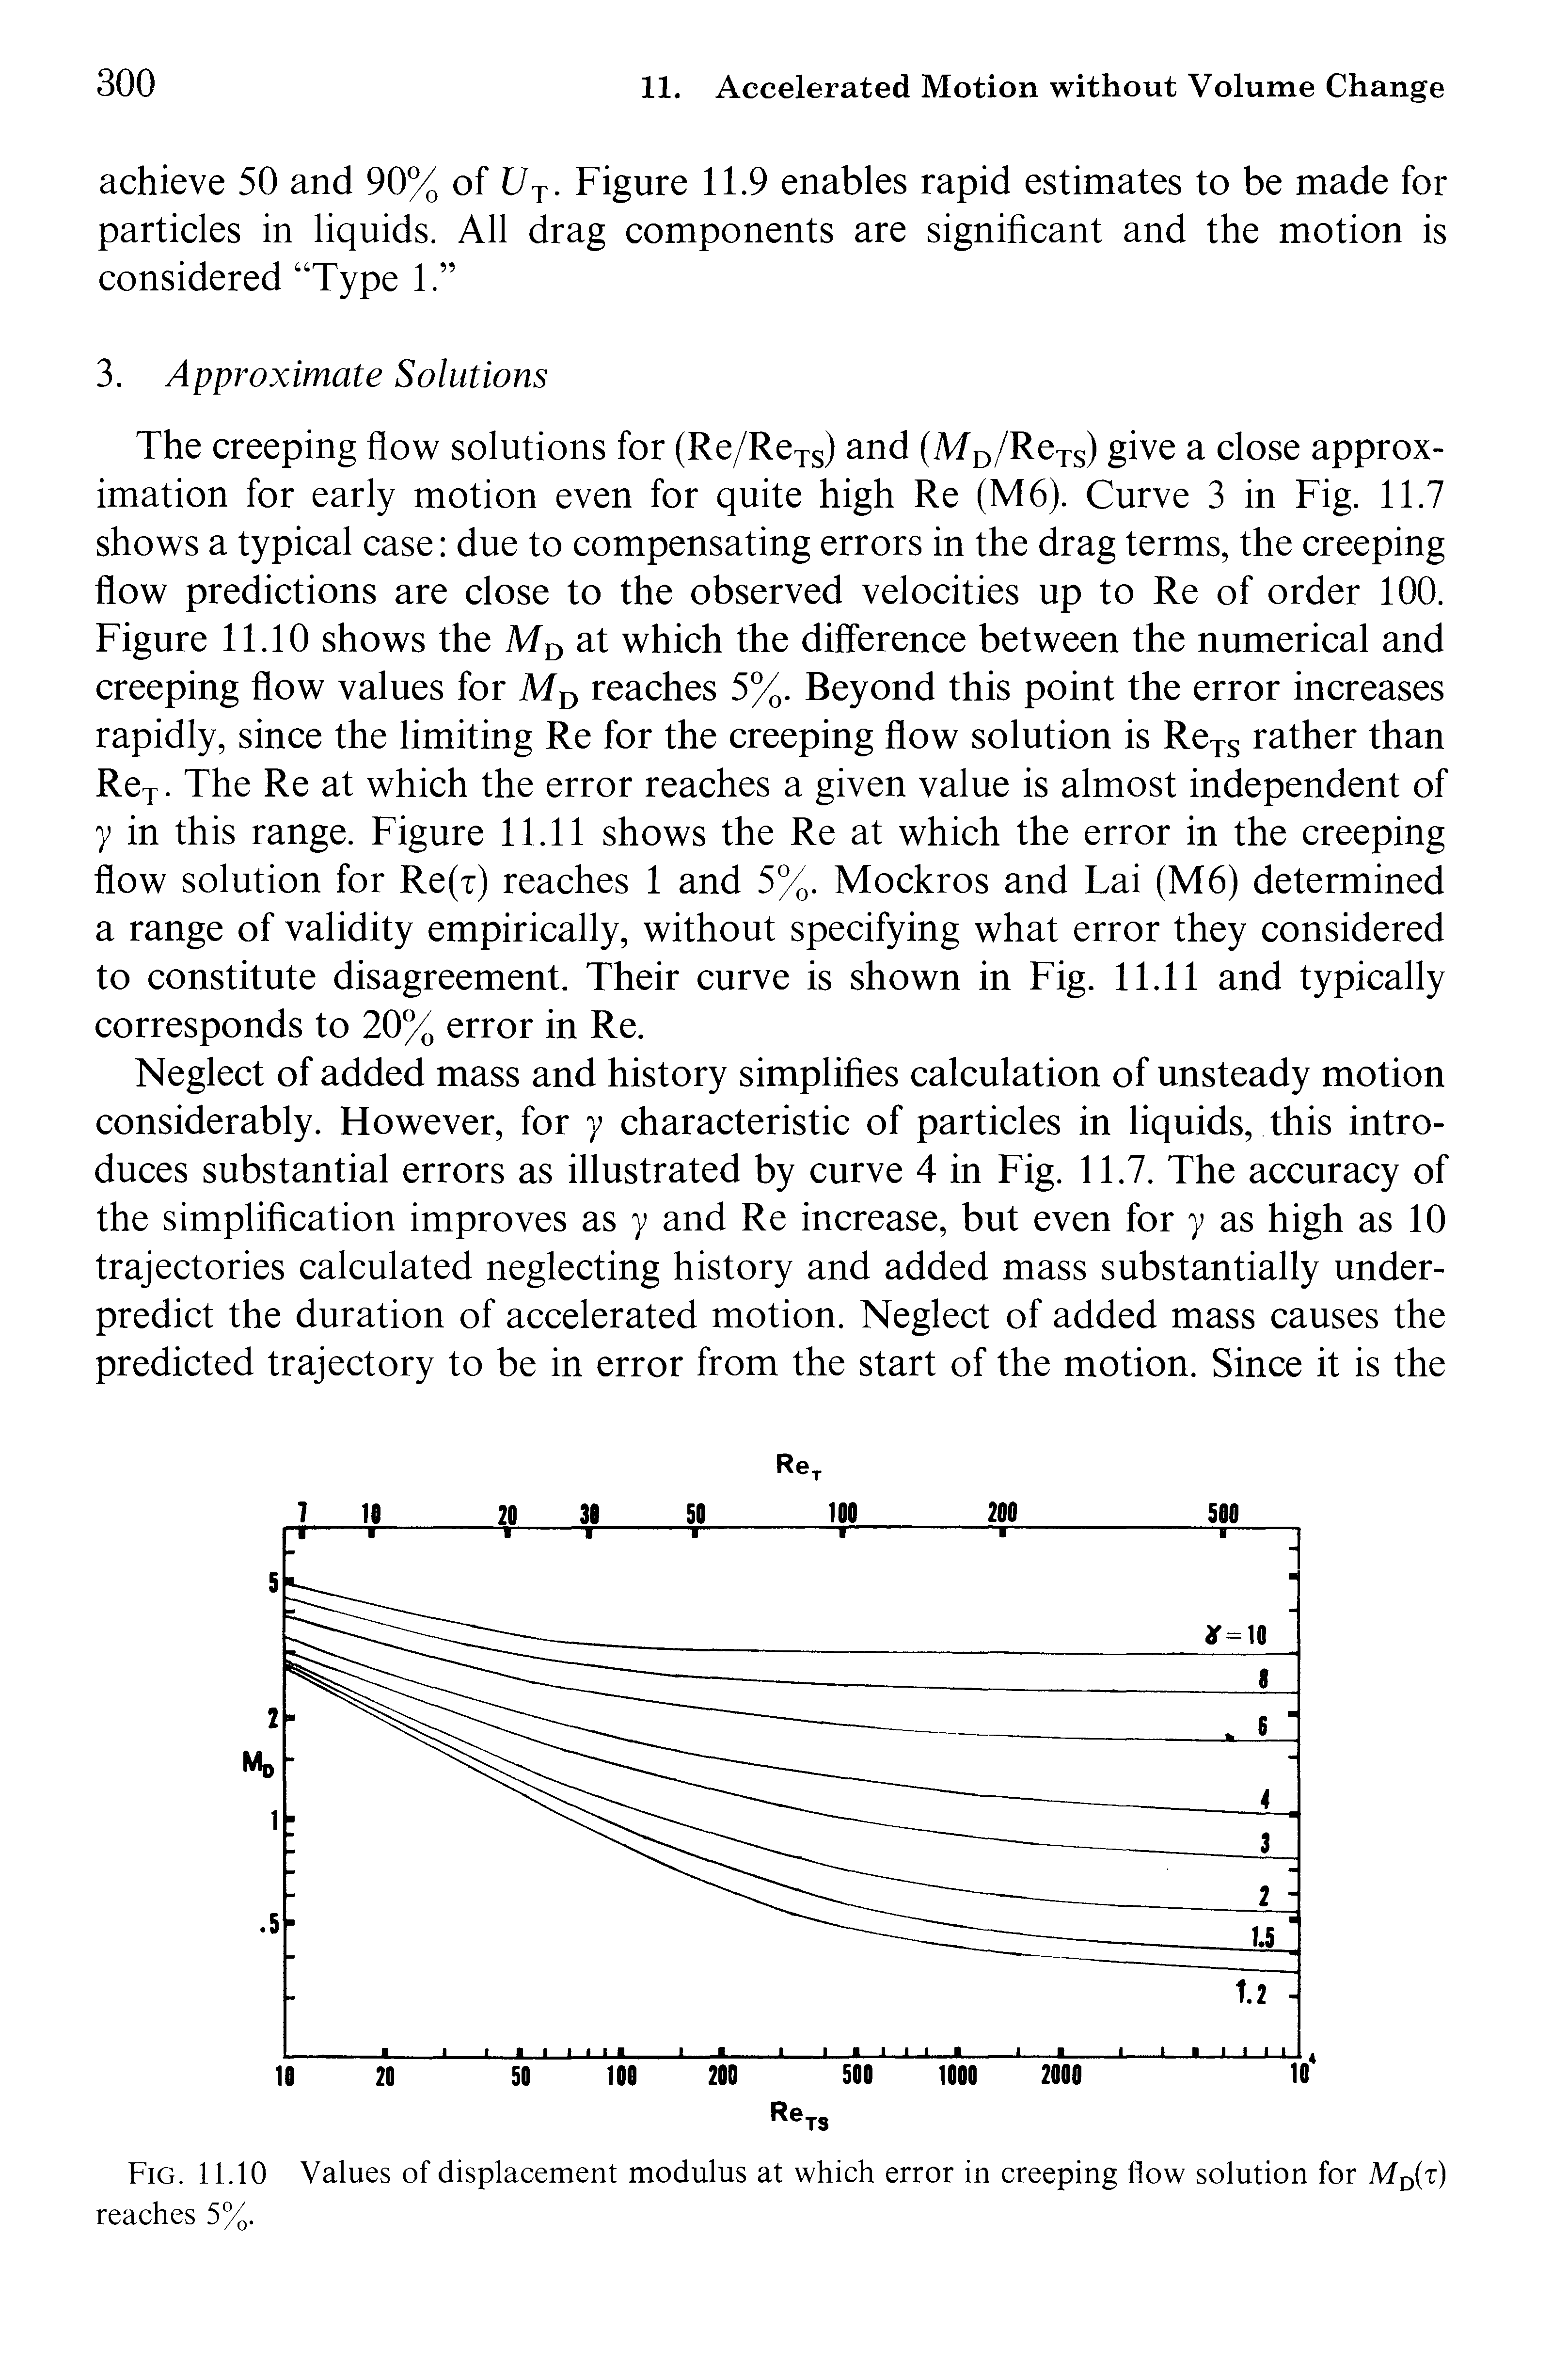 Fig. 11.10 Values of displacement modulus at which error in creeping flow solution for M t) reaches 5%.